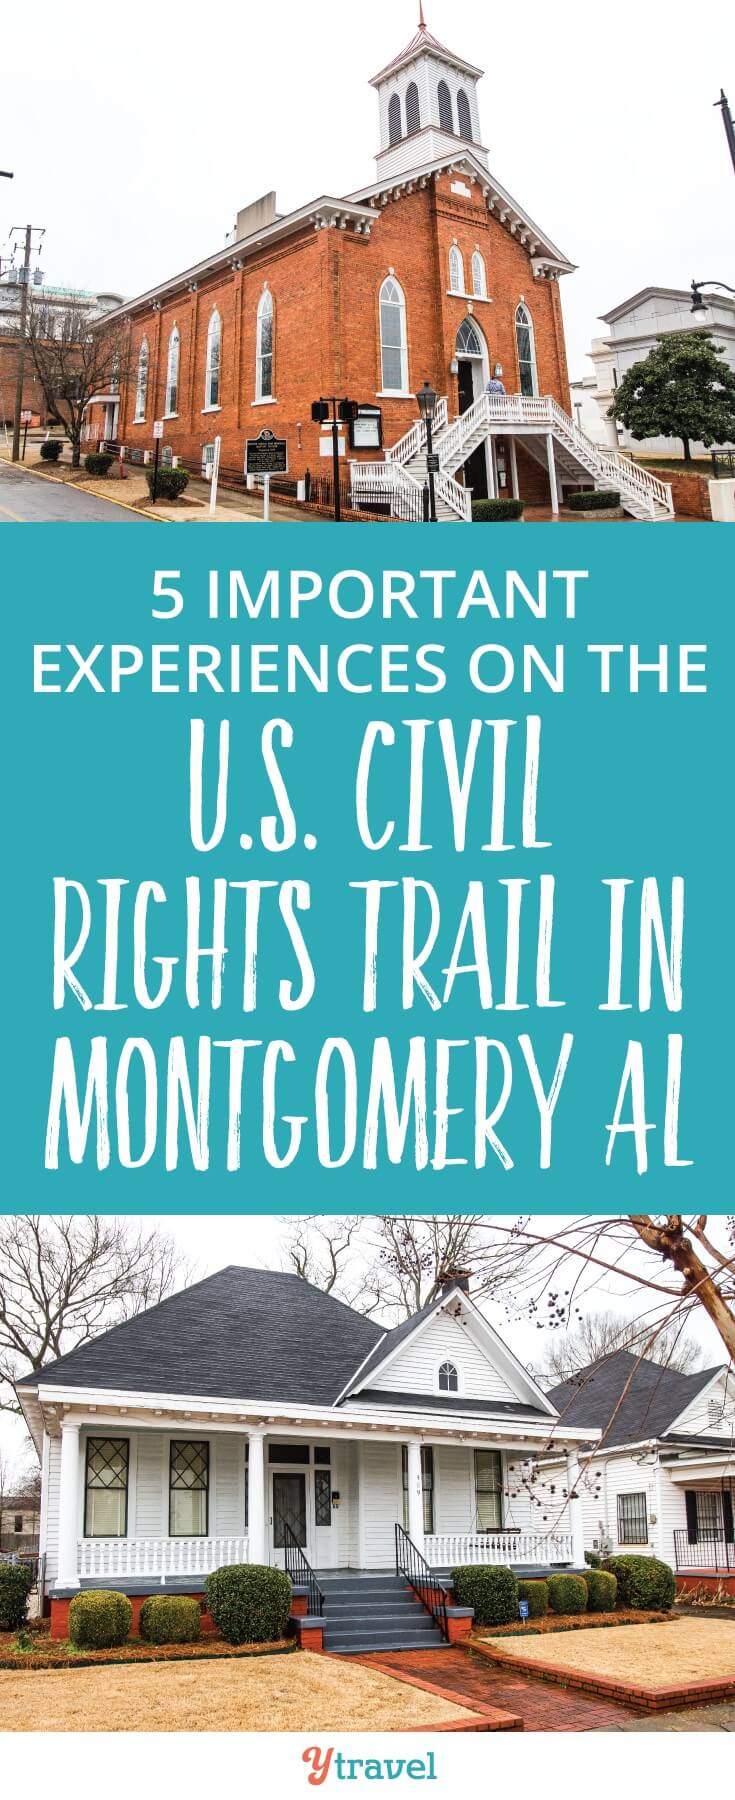 Things to do in Montgomery, AL: Montgomery Alabama is really the birthplace of Civil Rights Movement. There are five important experiences on the U.S. Civil Rights Trail in Montgomery Alabama that will help you gain an understanding of the struggles and the triumphs and how what happened here changed the world.